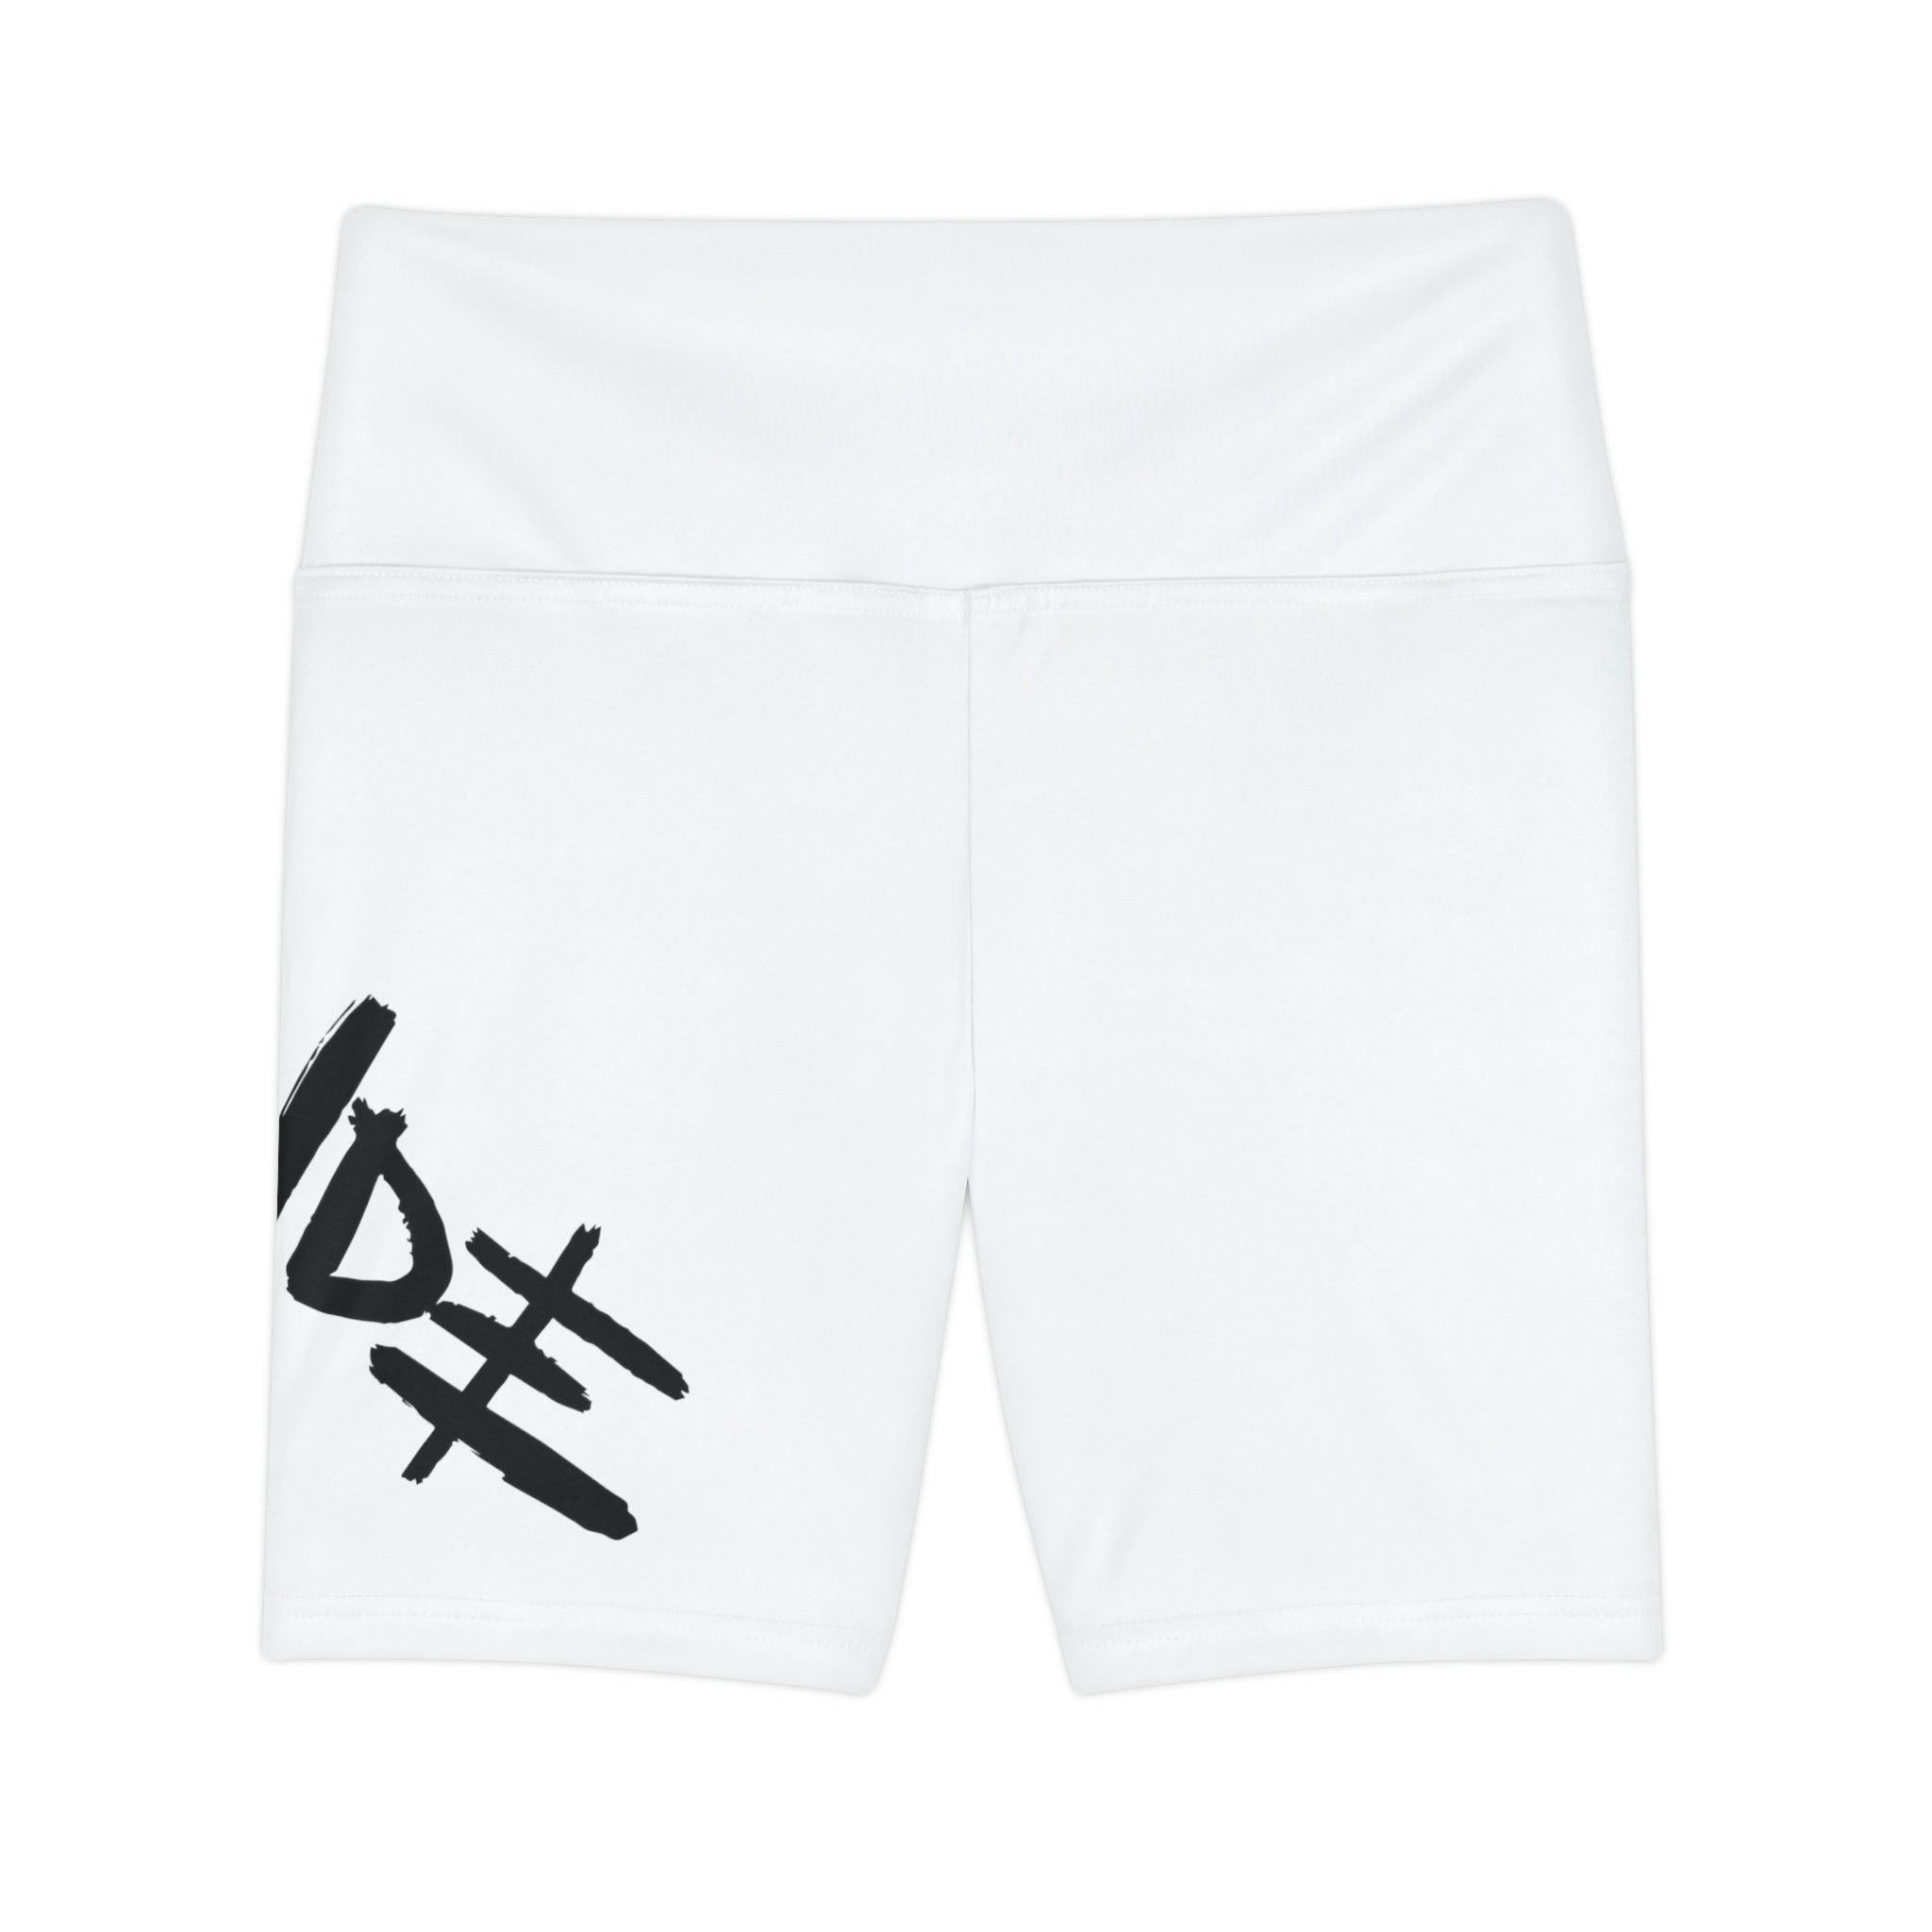 EFENDEE Workout Shorts (White and Black)